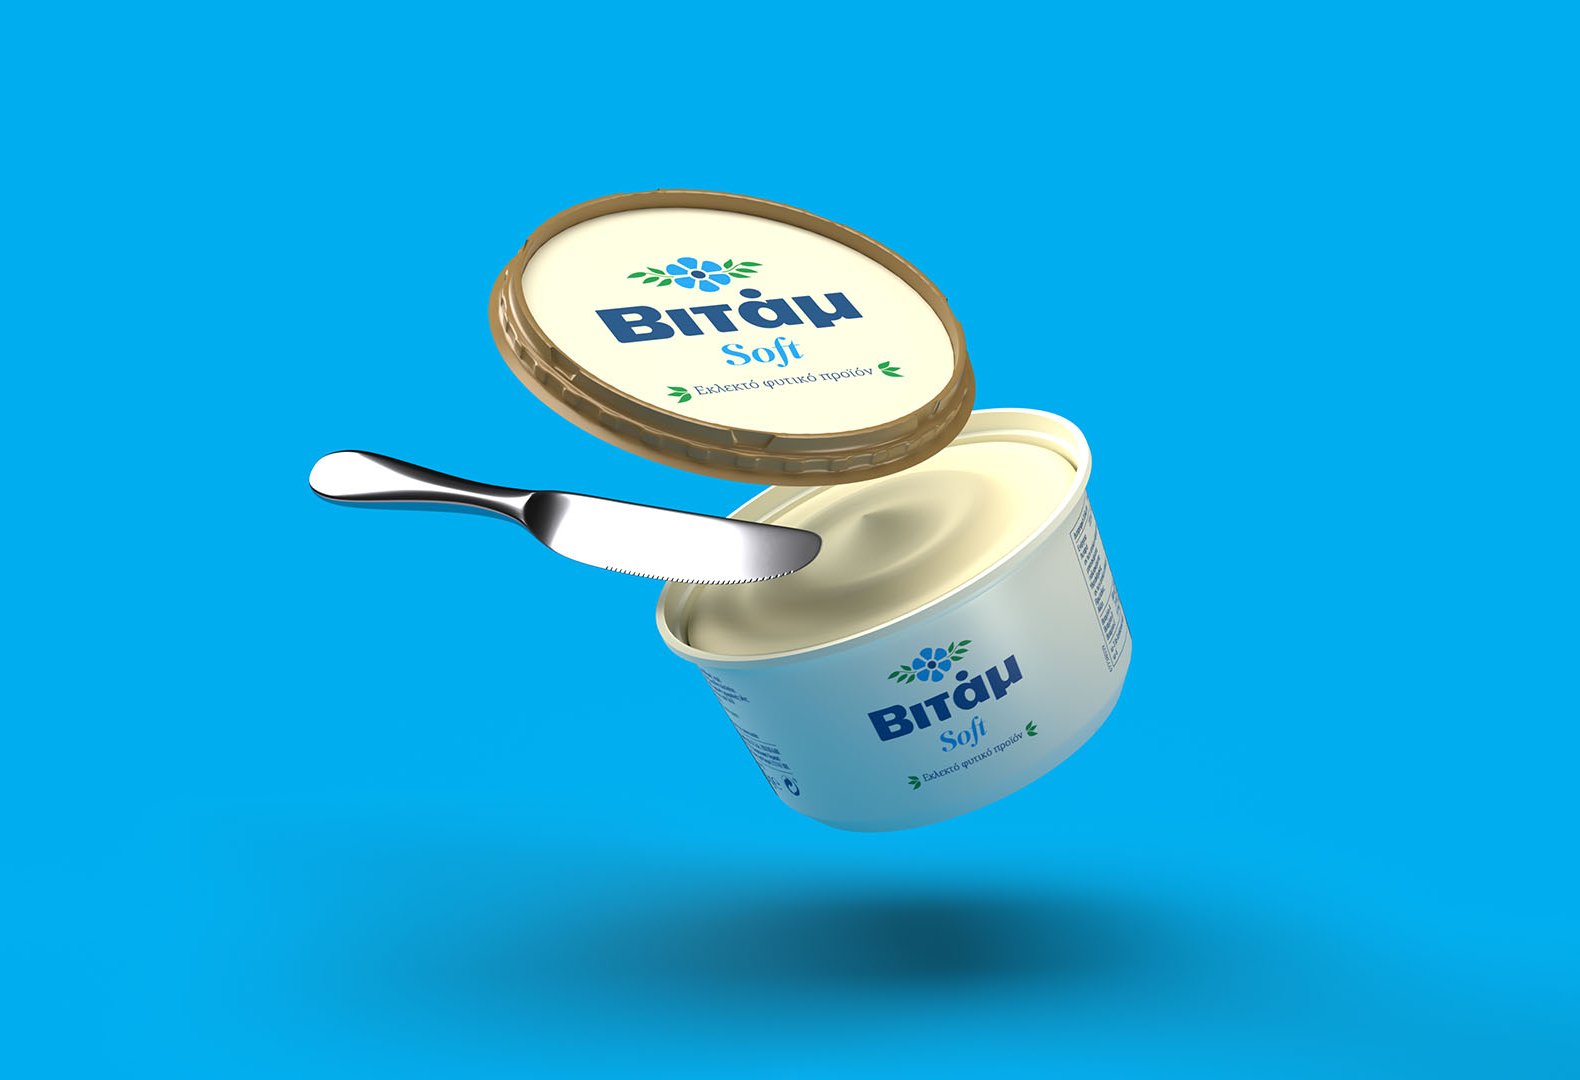 3d image of Vitam spread new beige and gold tub packaging next to a knife